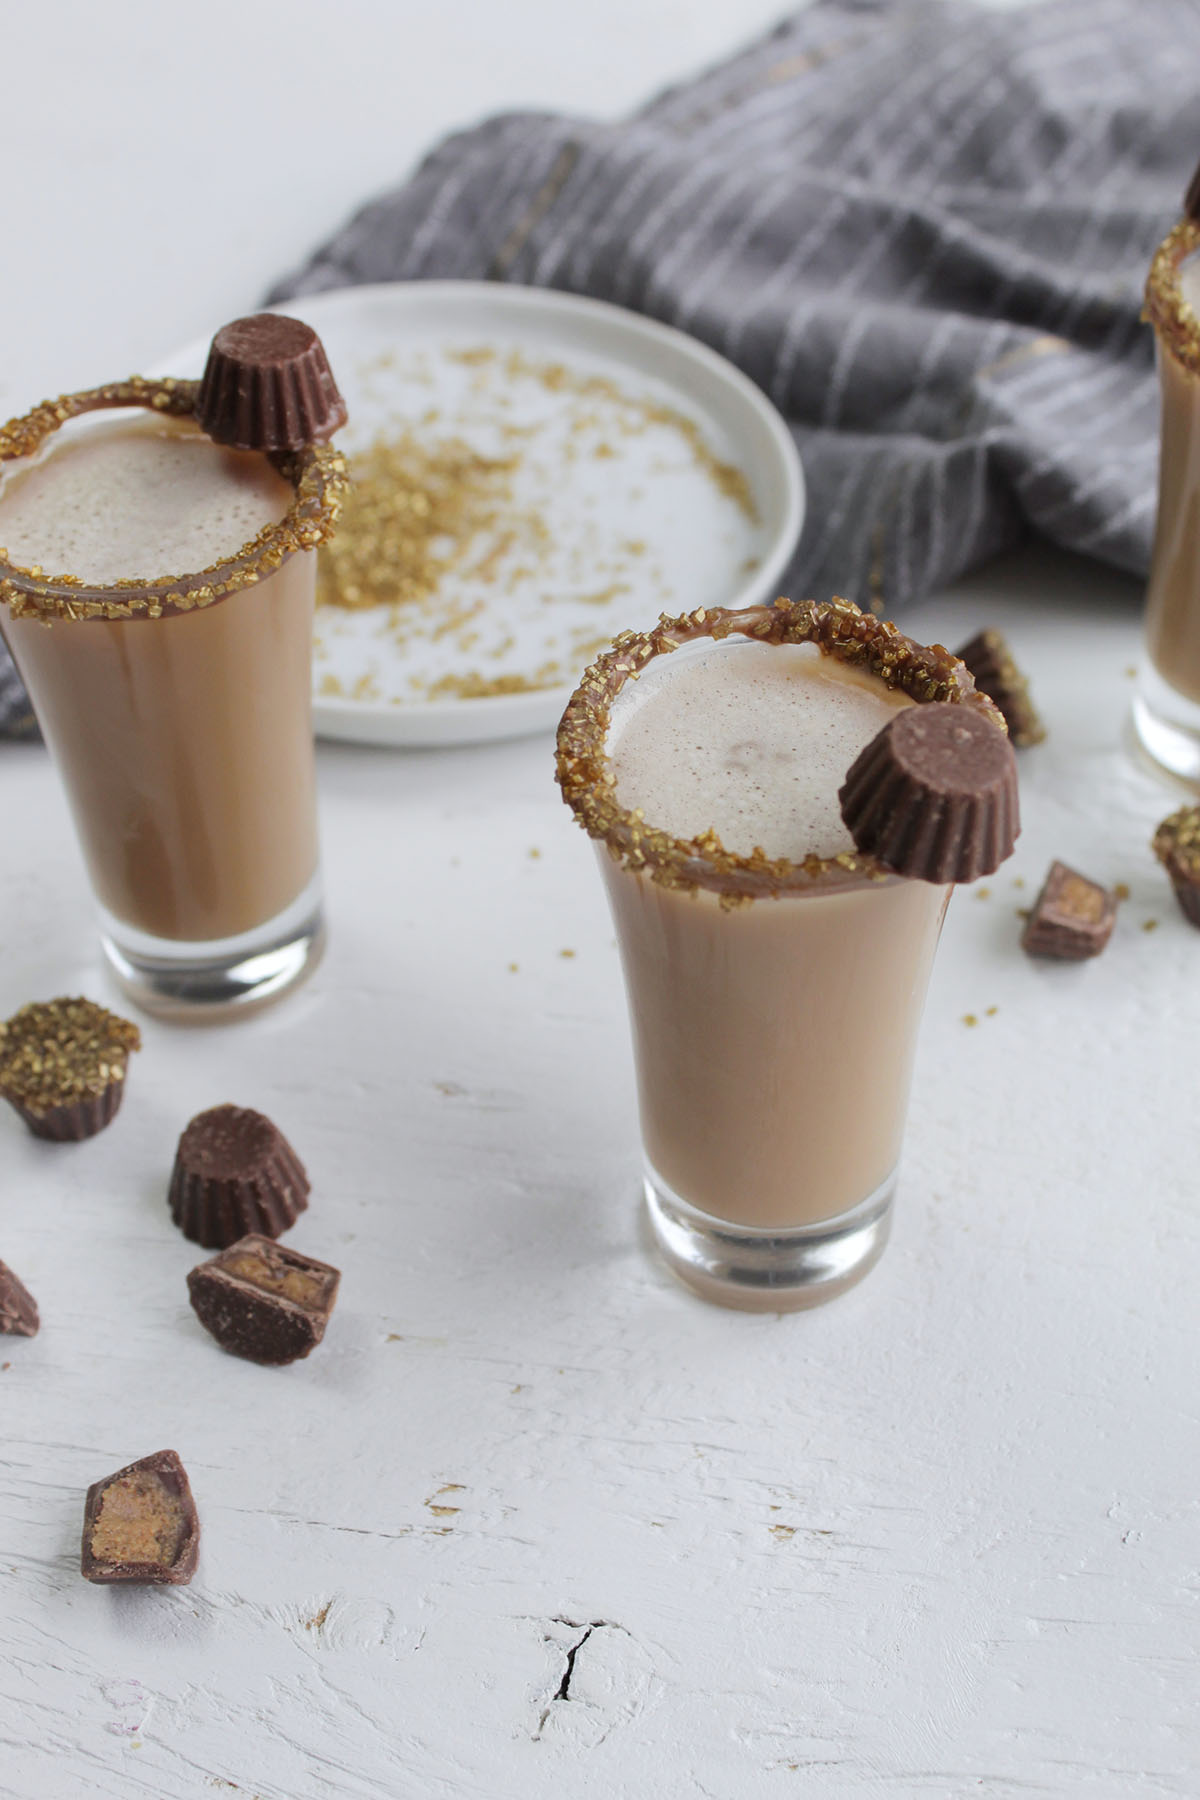 peanut butter whiskey drinks with chocolate rim.